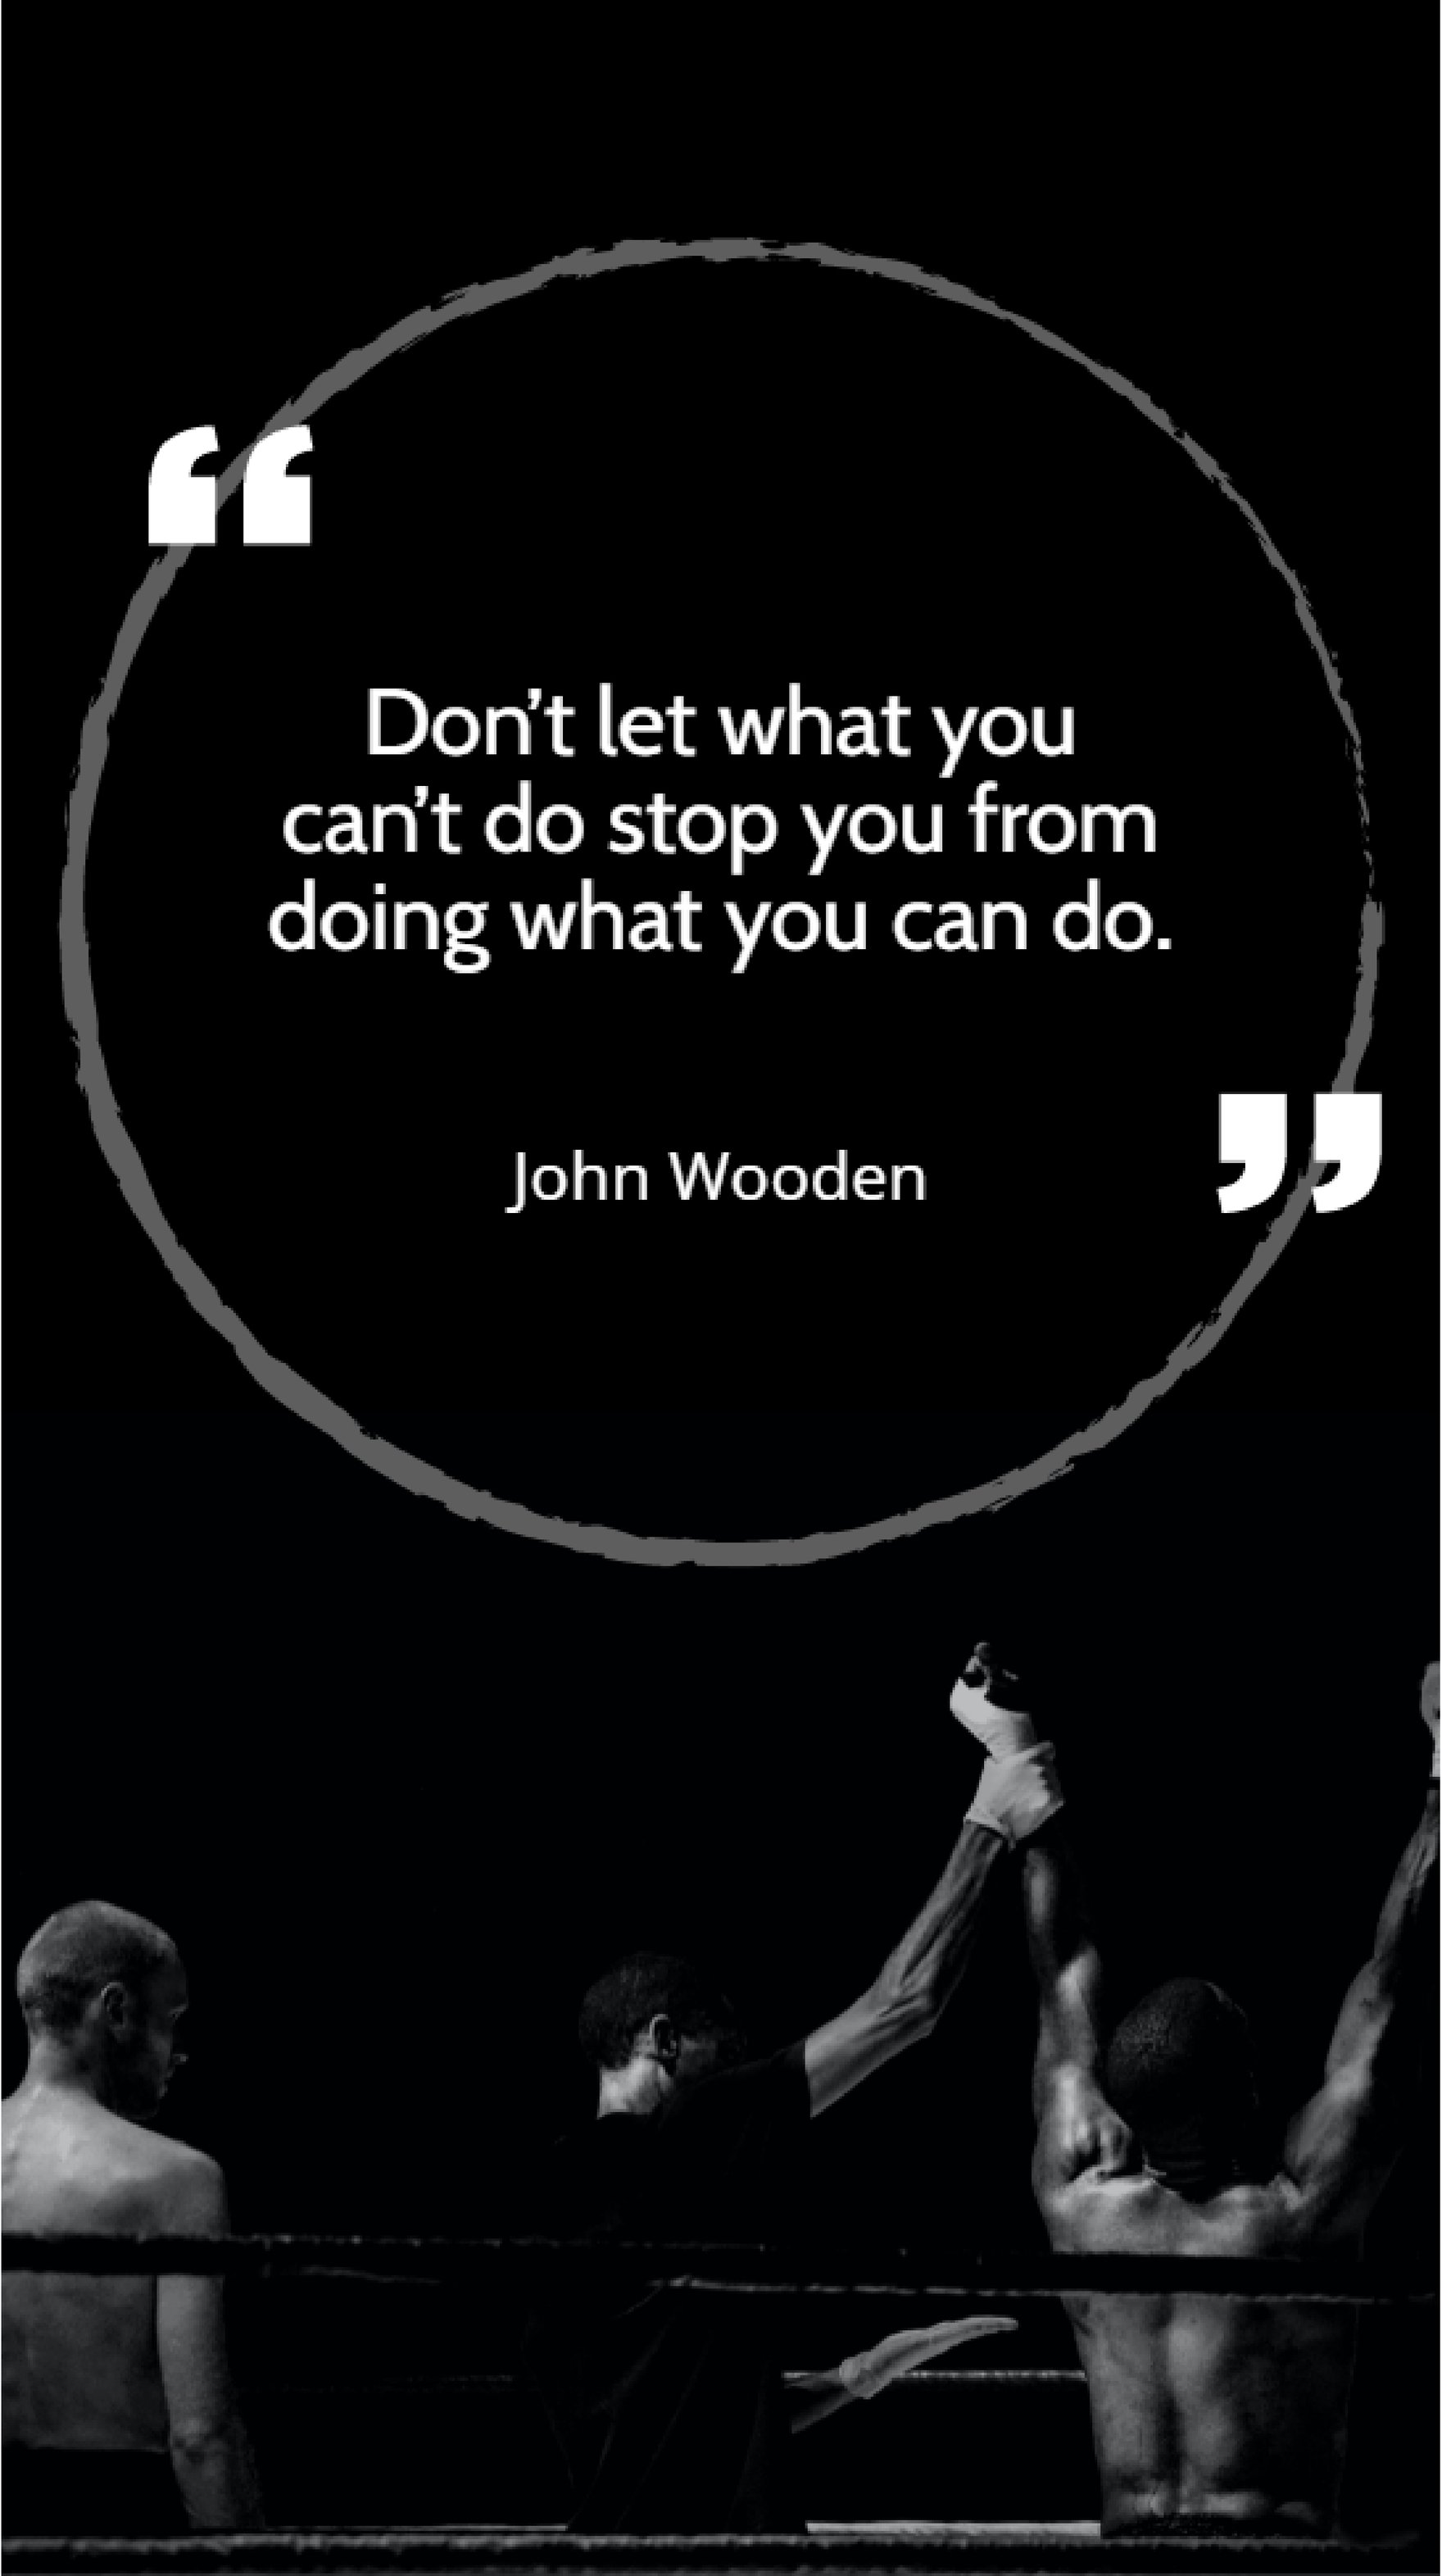 John Wooden - Don’t let what you can’t do stop you from doing what you can do.